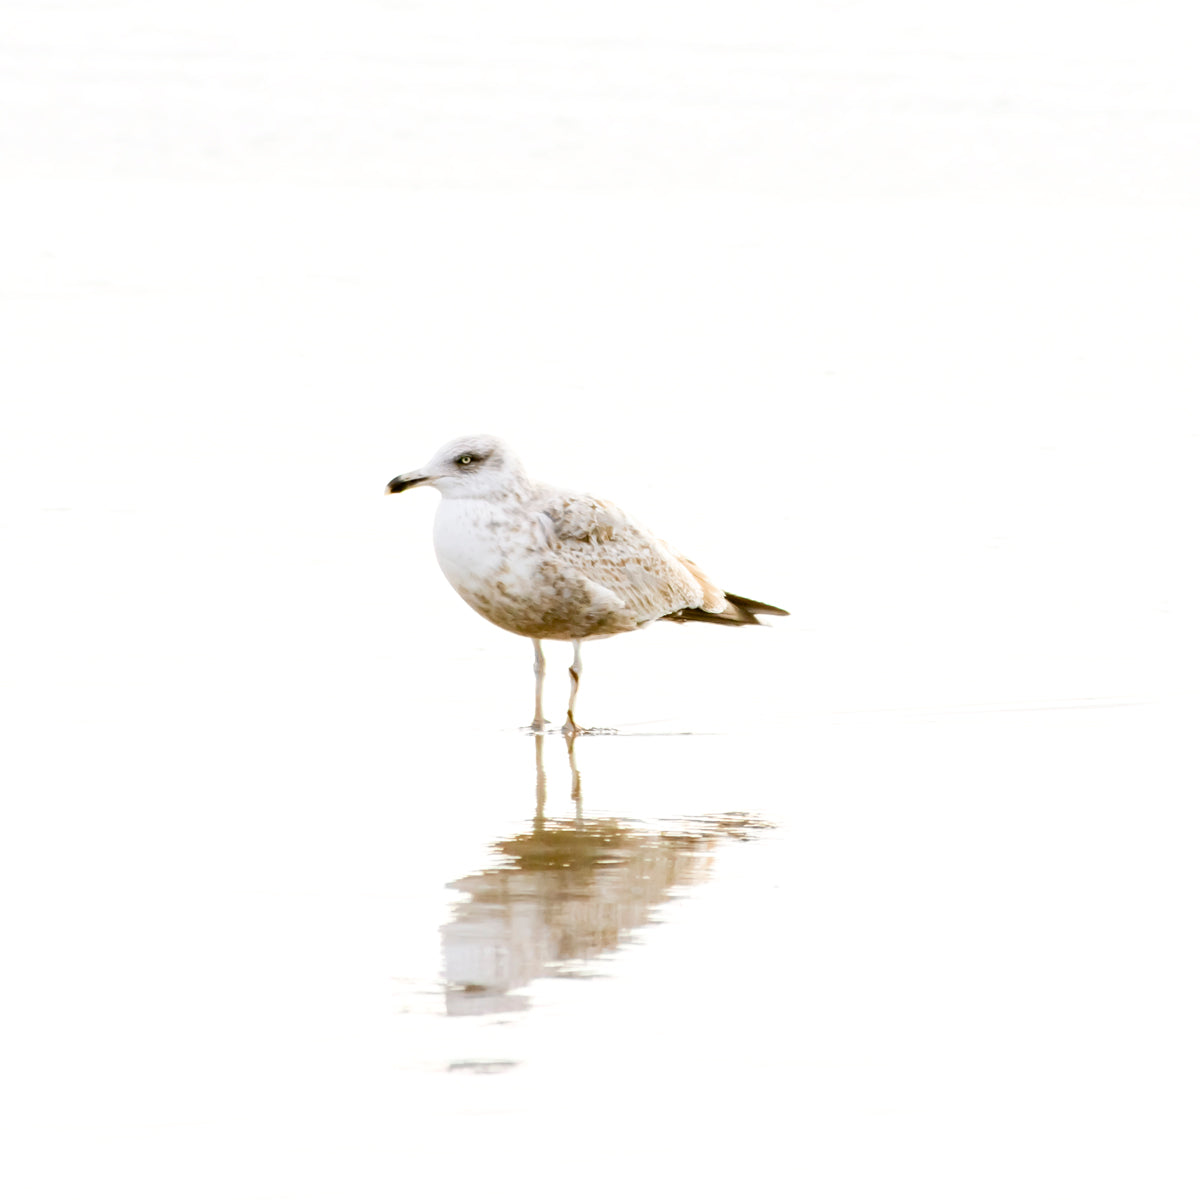 Seagull - Bird photography print by Cattie Coyle Photography